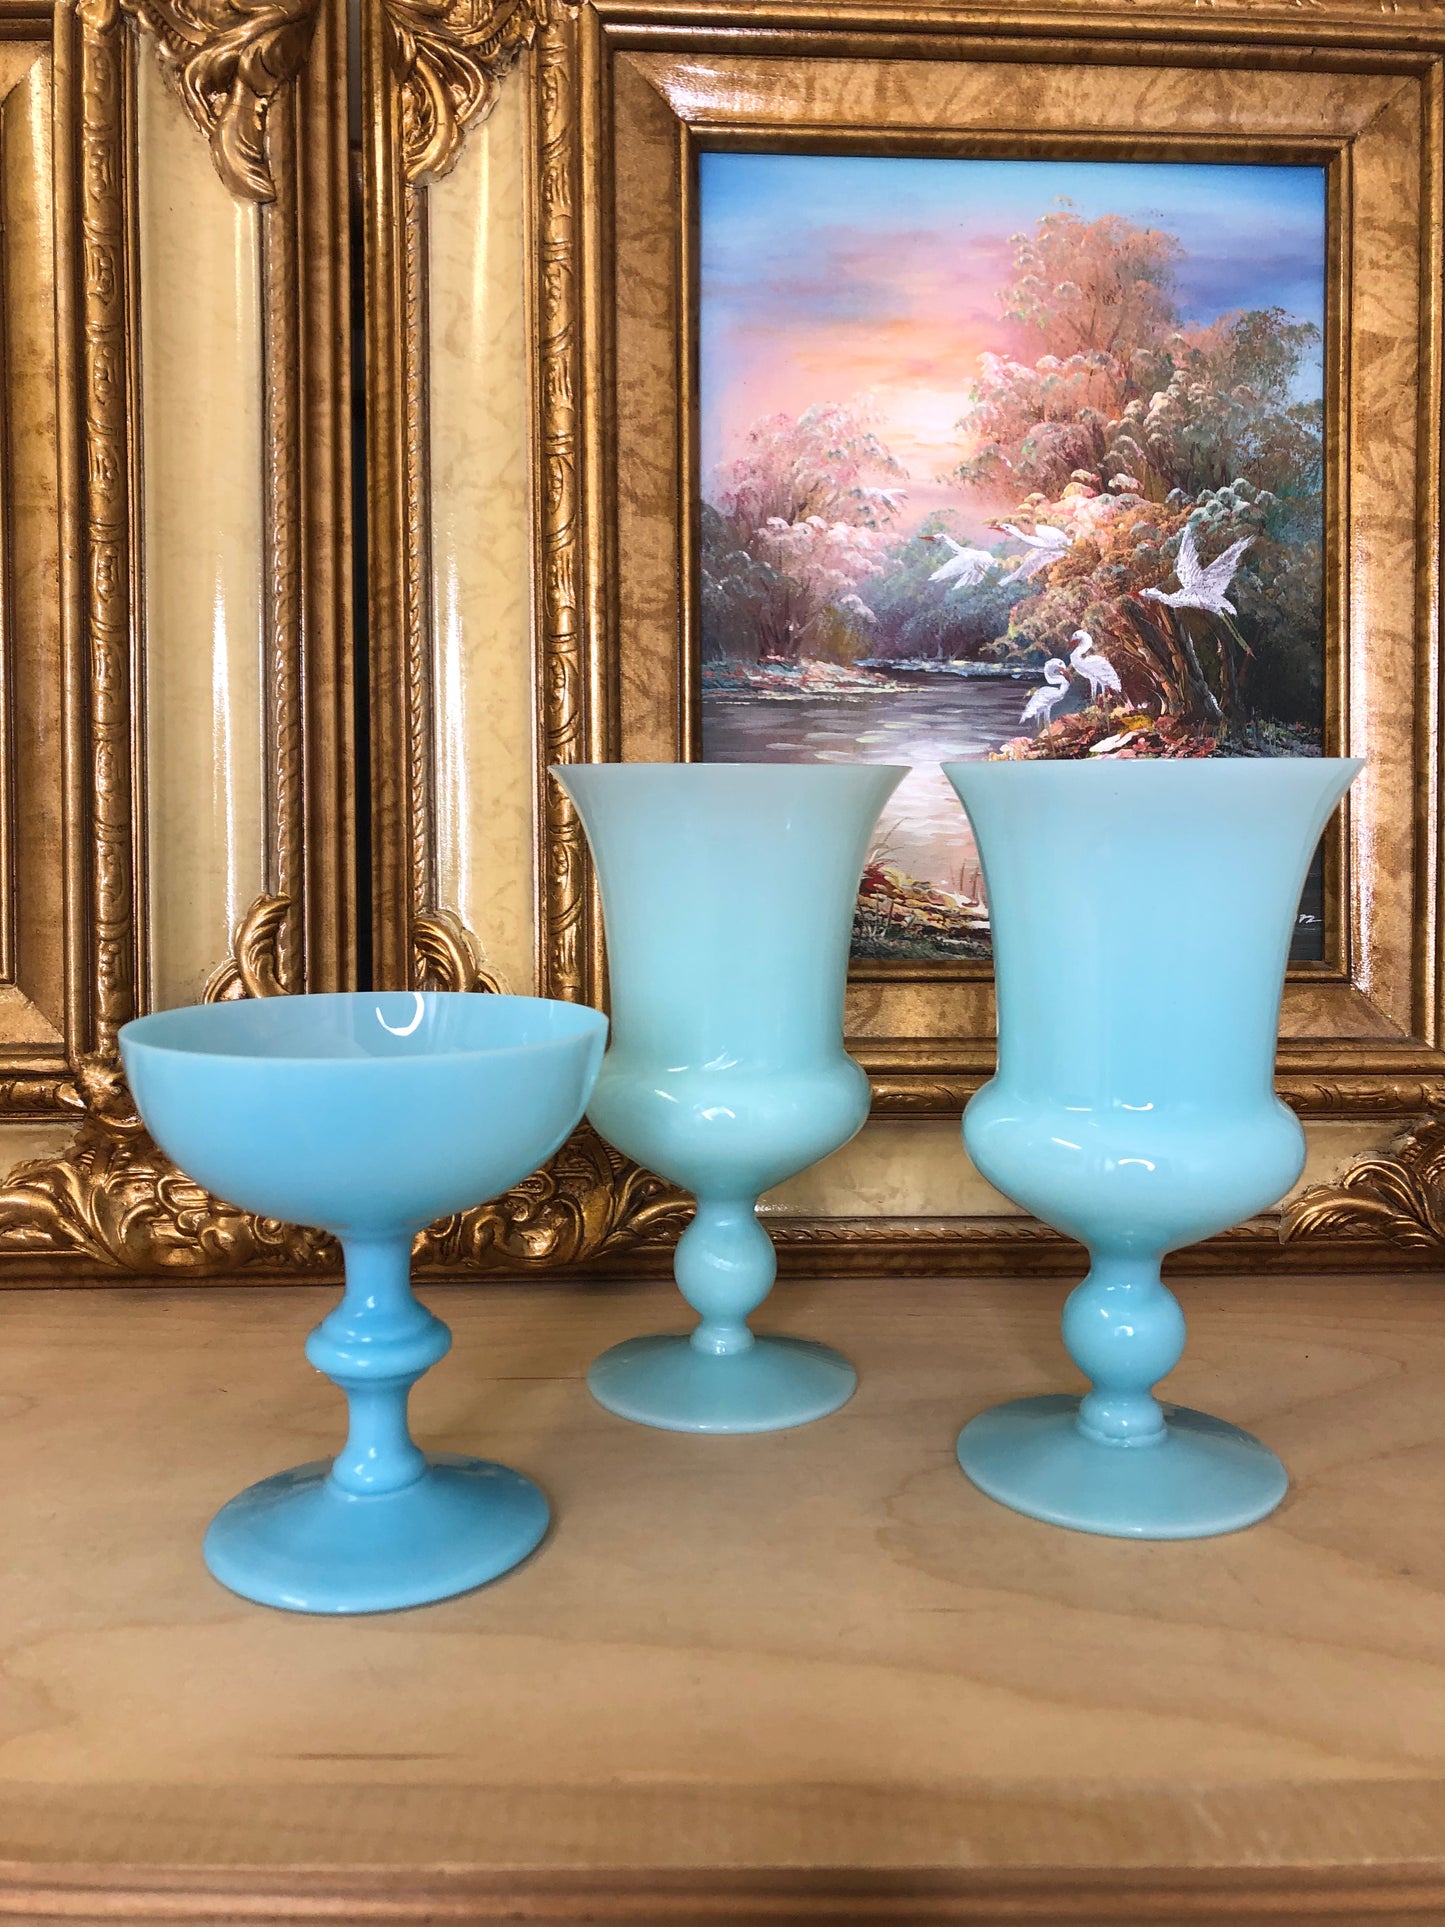 Stunning French Opaline Portieux Vallerysthall glasses